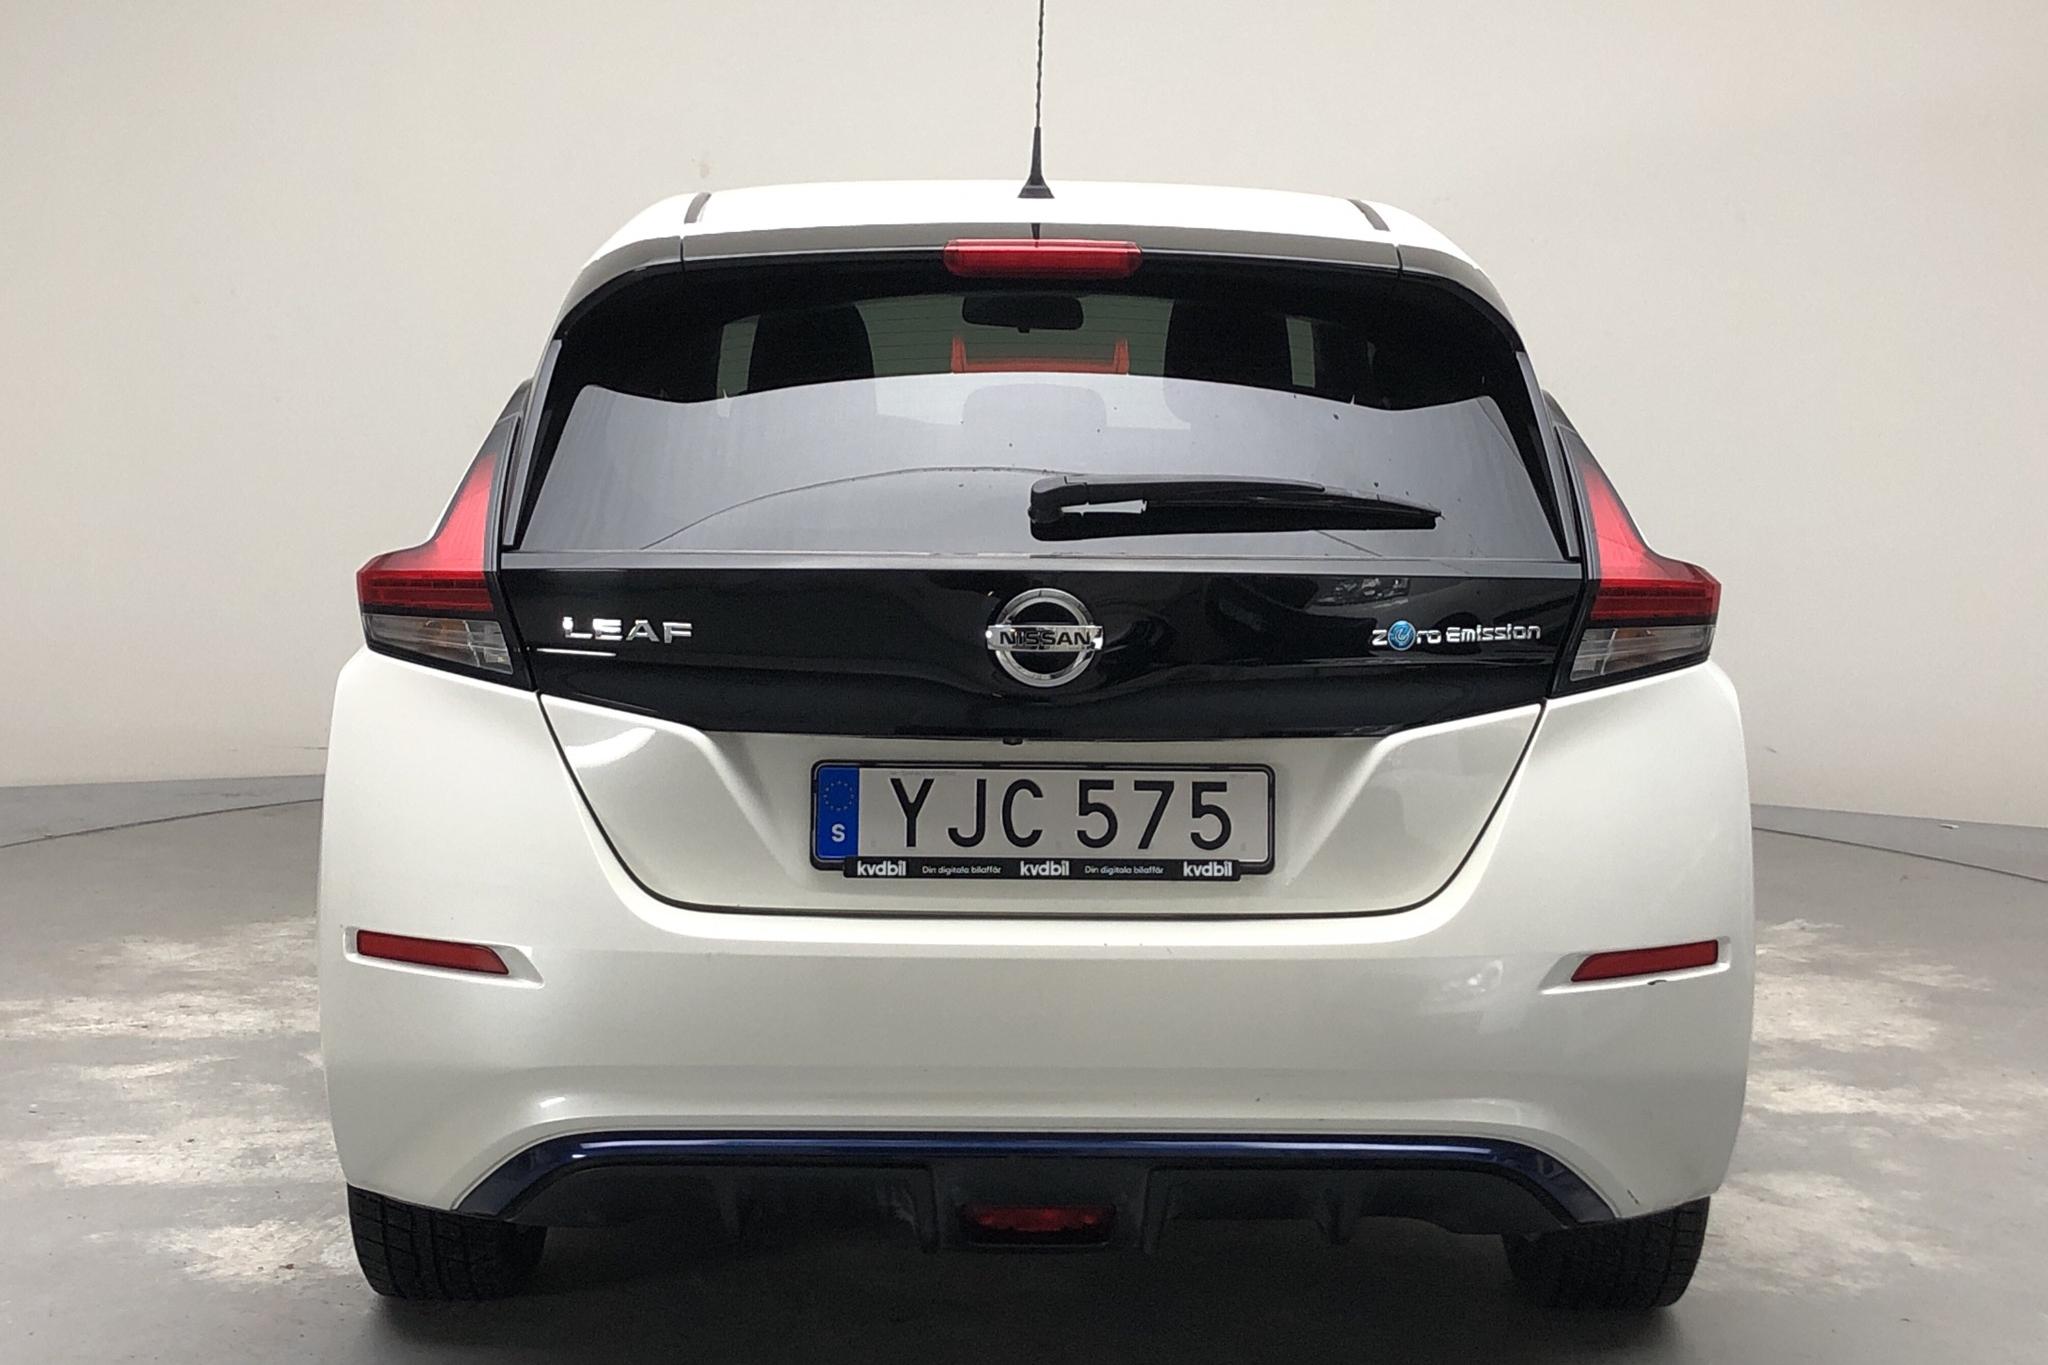 Nissan LEAF 5dr 39 kWh (150hk) - 29 000 km - Automatic - white - 2018